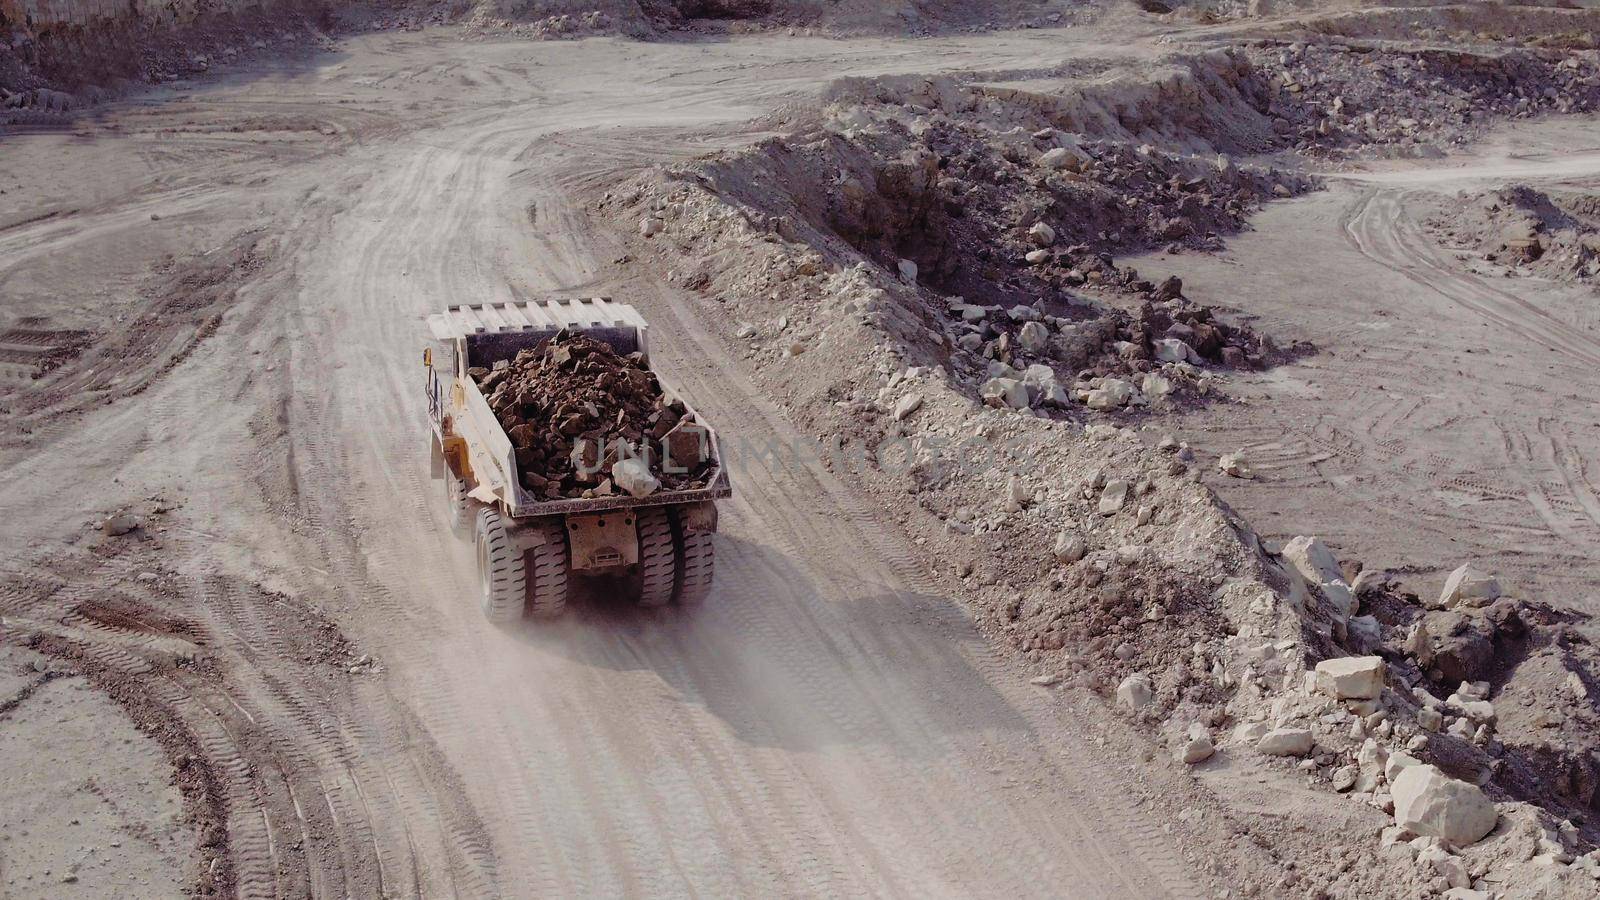 Dump truck loaded with ore and driving through the pit. Big yellow heavy truck in open cast mine mining of coal the overall plan. Open pit anthracite mining, mining truck at work working in quarry by uflypro